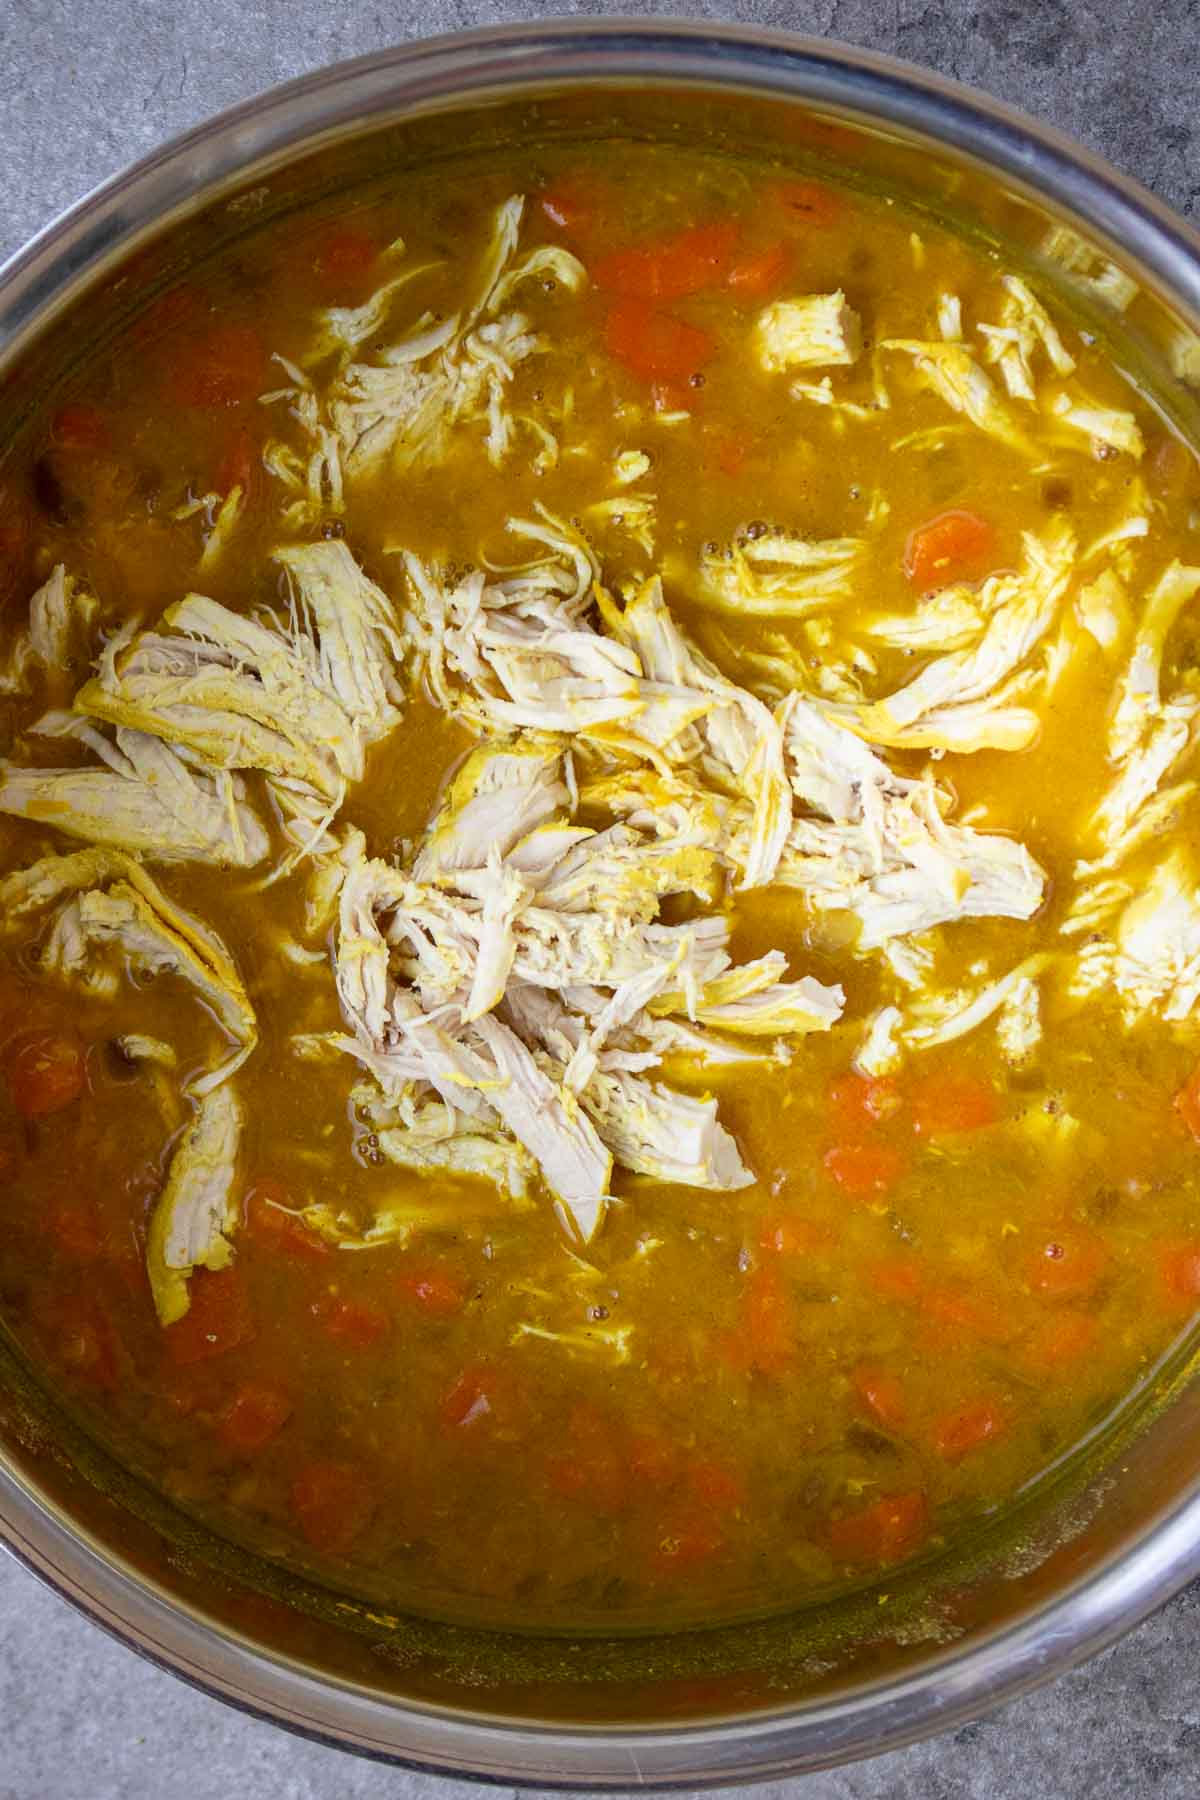 Large pot with cooked lentil soup with shredded chicken on top.